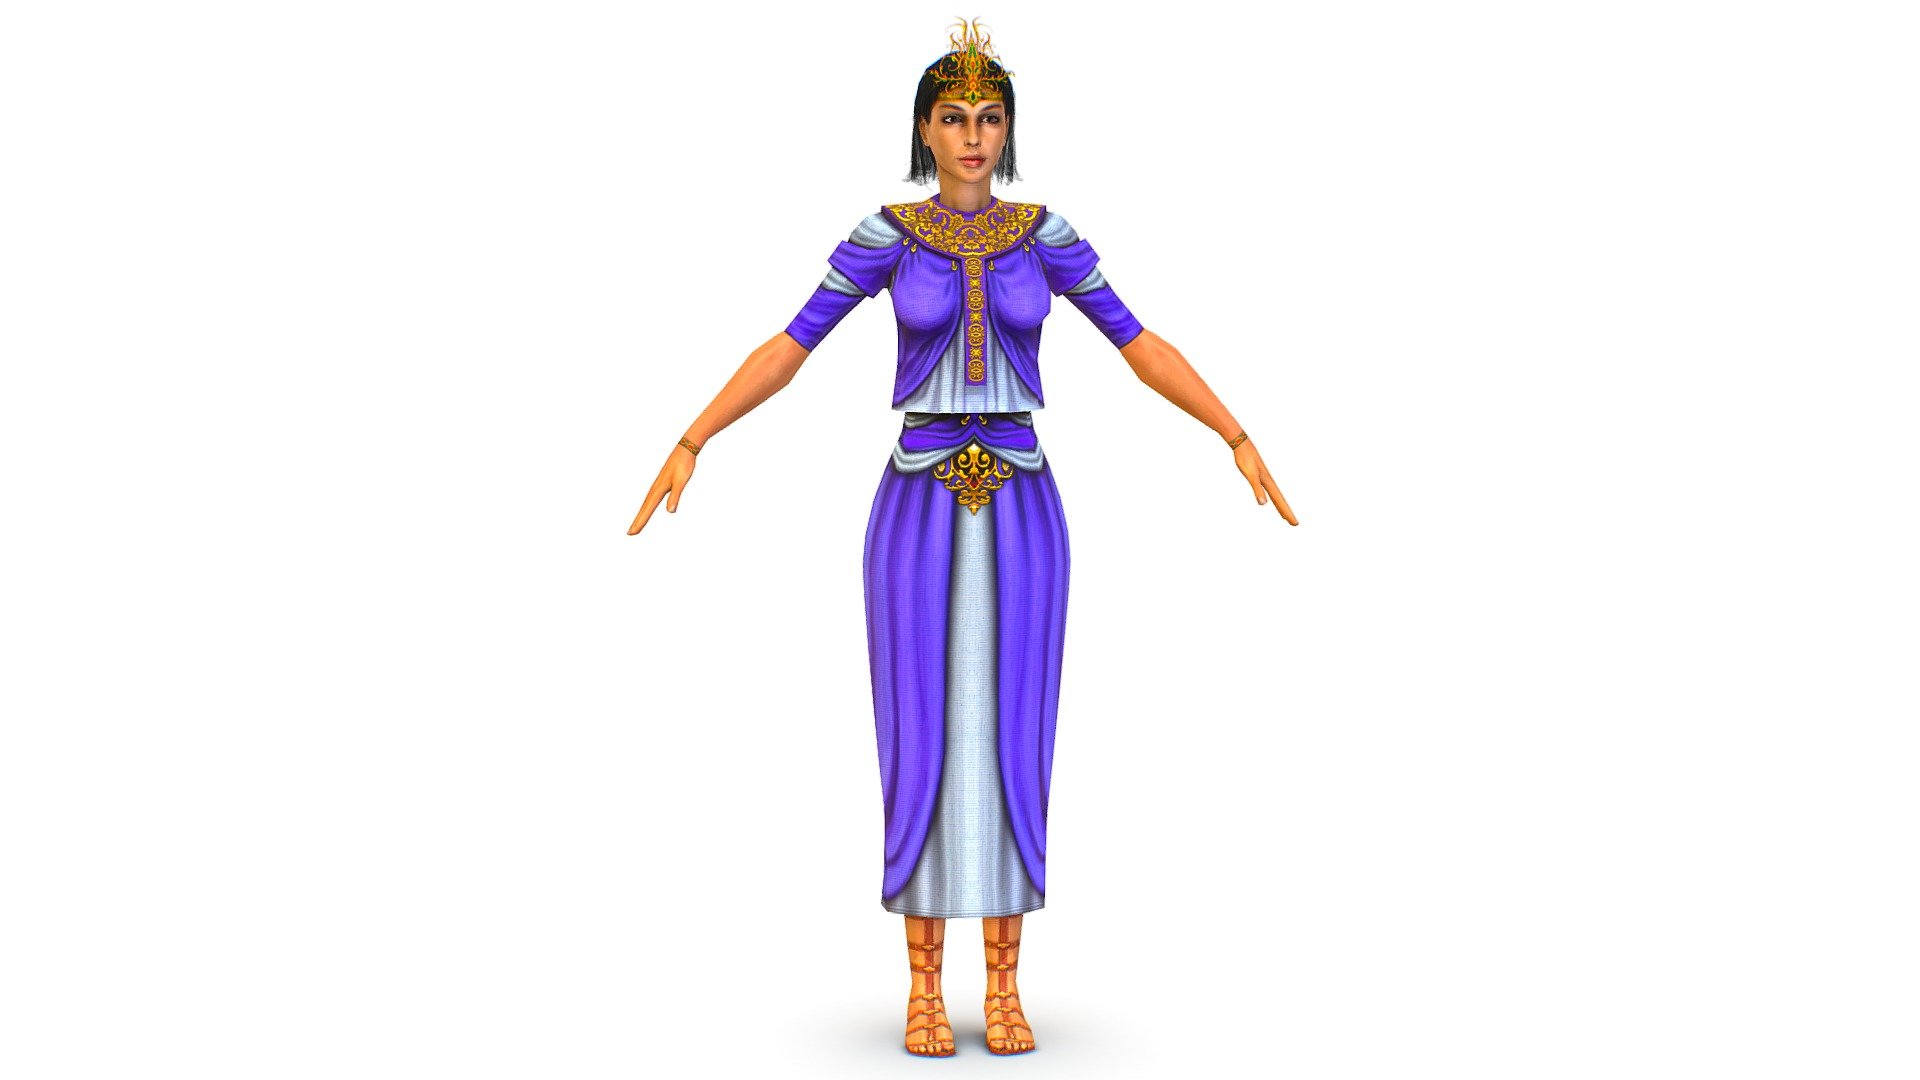 Arab dancer in national costume - 3dsMax file included/ texture1024 body 512 head 512 hair - color only 3d model